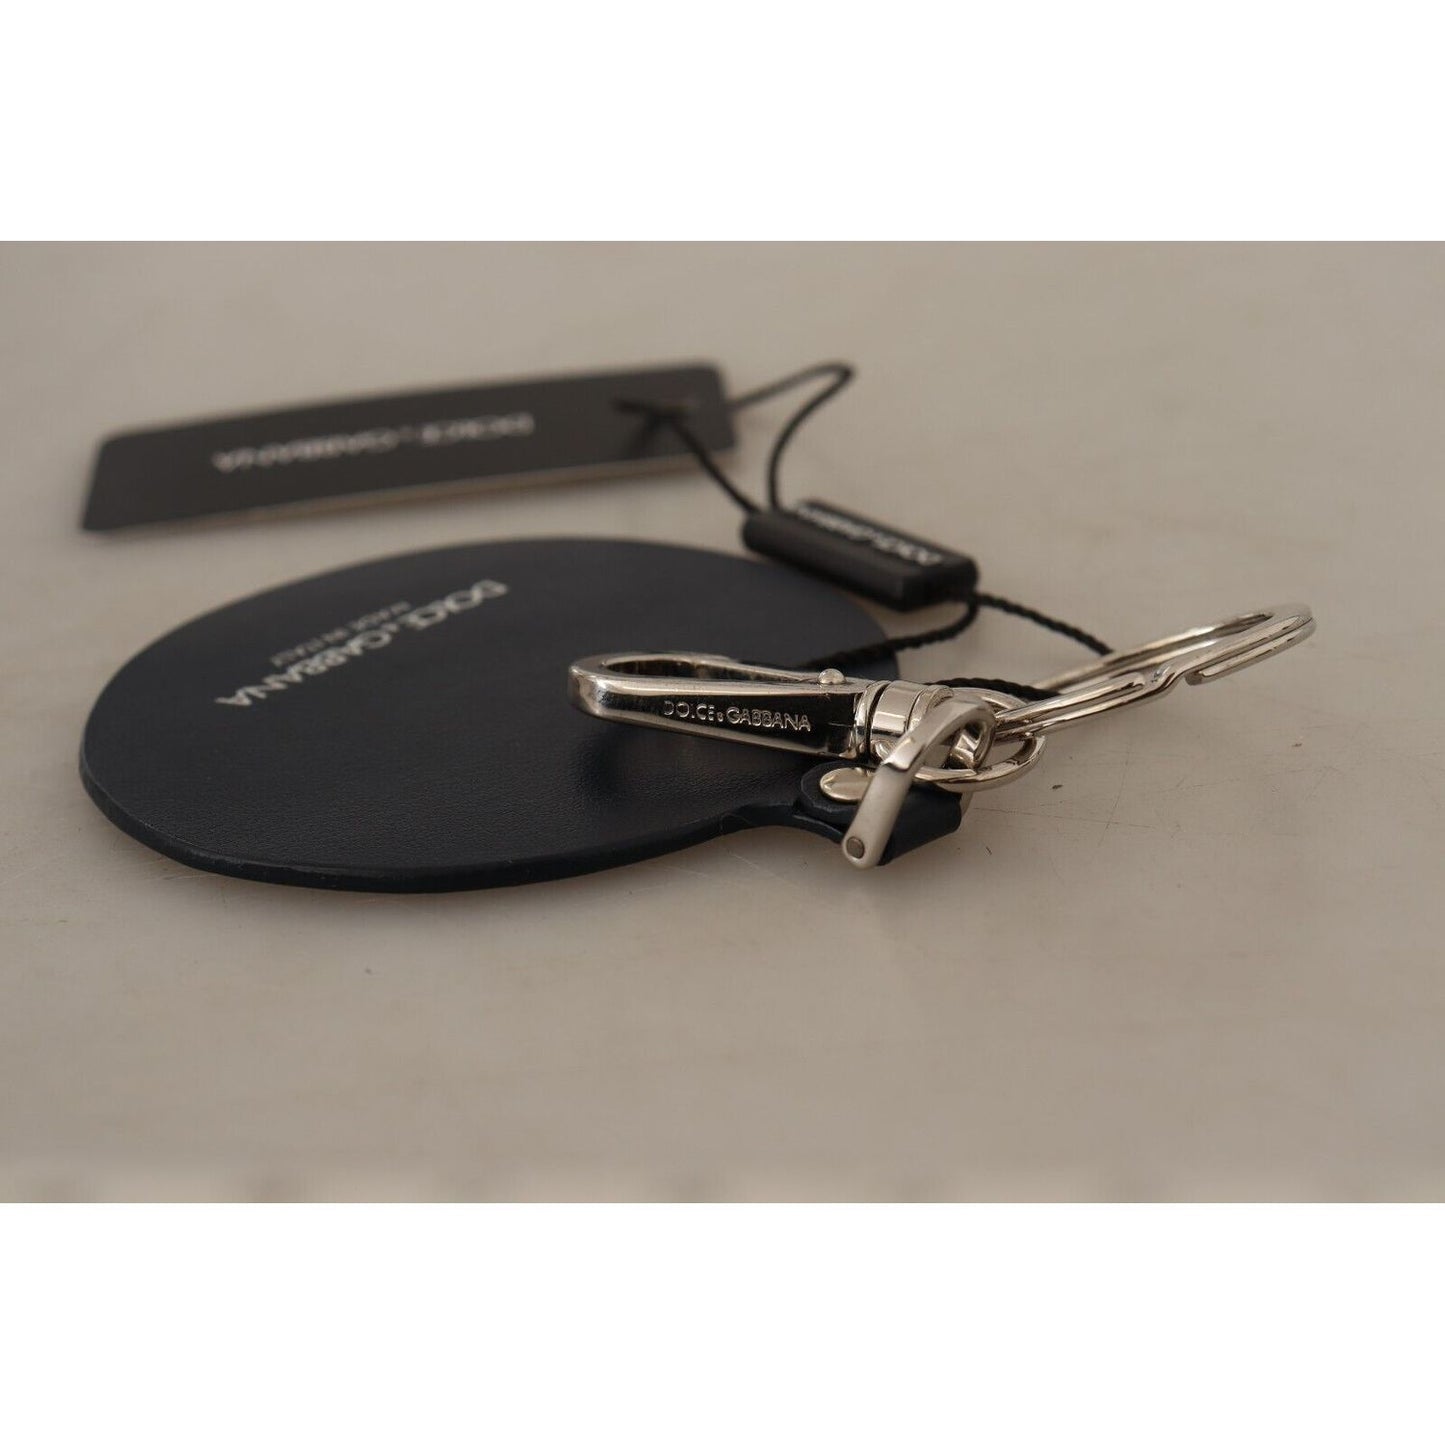 Dolce & Gabbana Chic Black Leather Keychain with Silver Accents black-leather-shell-metal-silver-tone-keyring-keychain